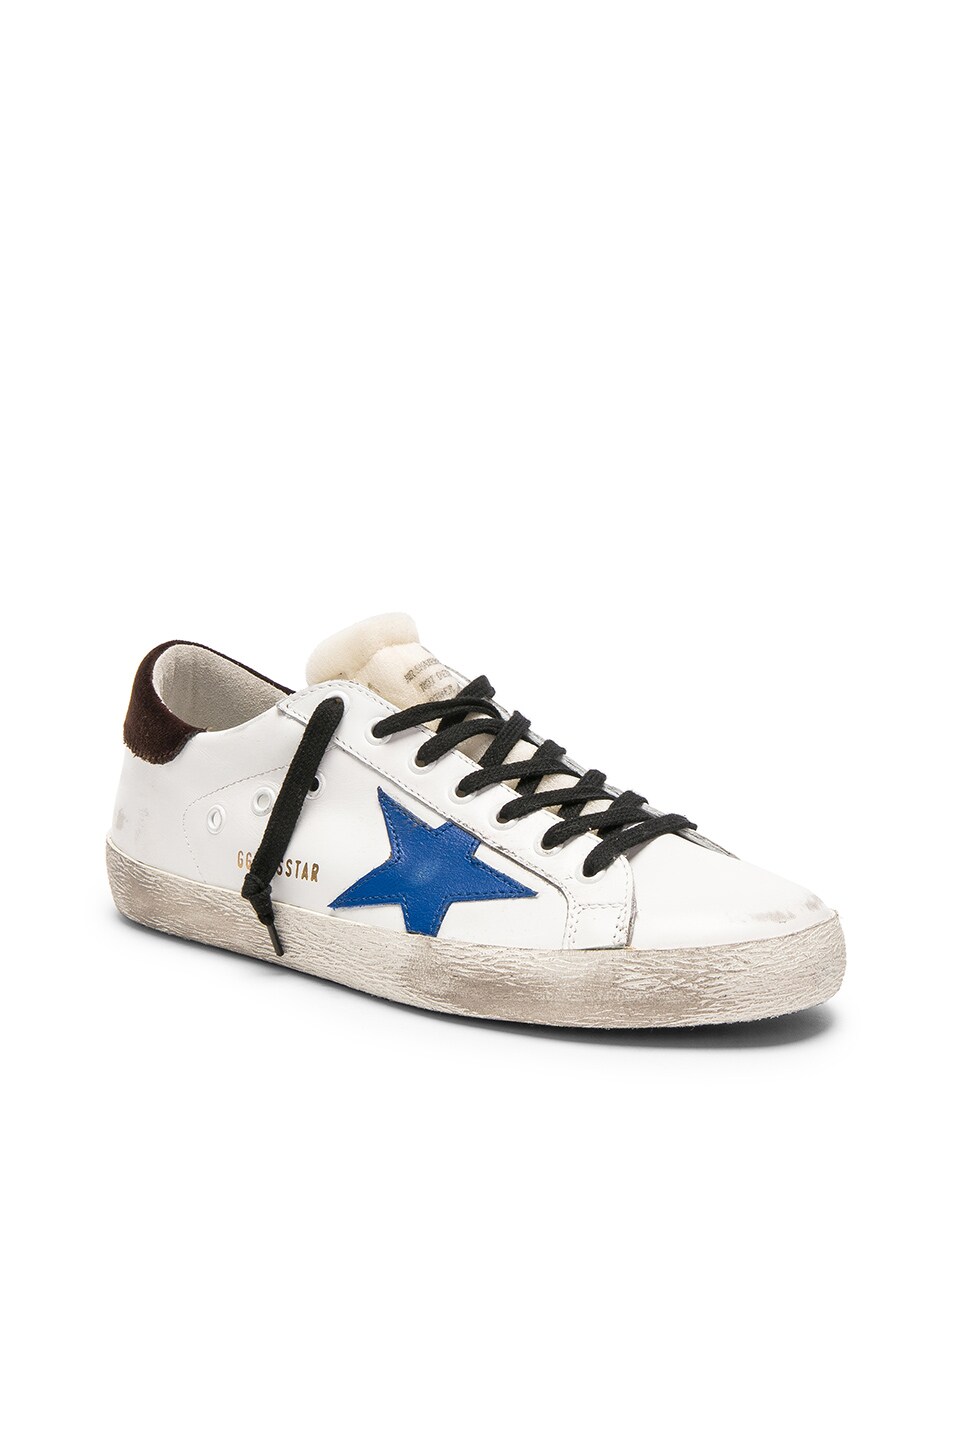 Image 1 of Golden Goose Superstar Sneakers in White Leather & Bluelette Star